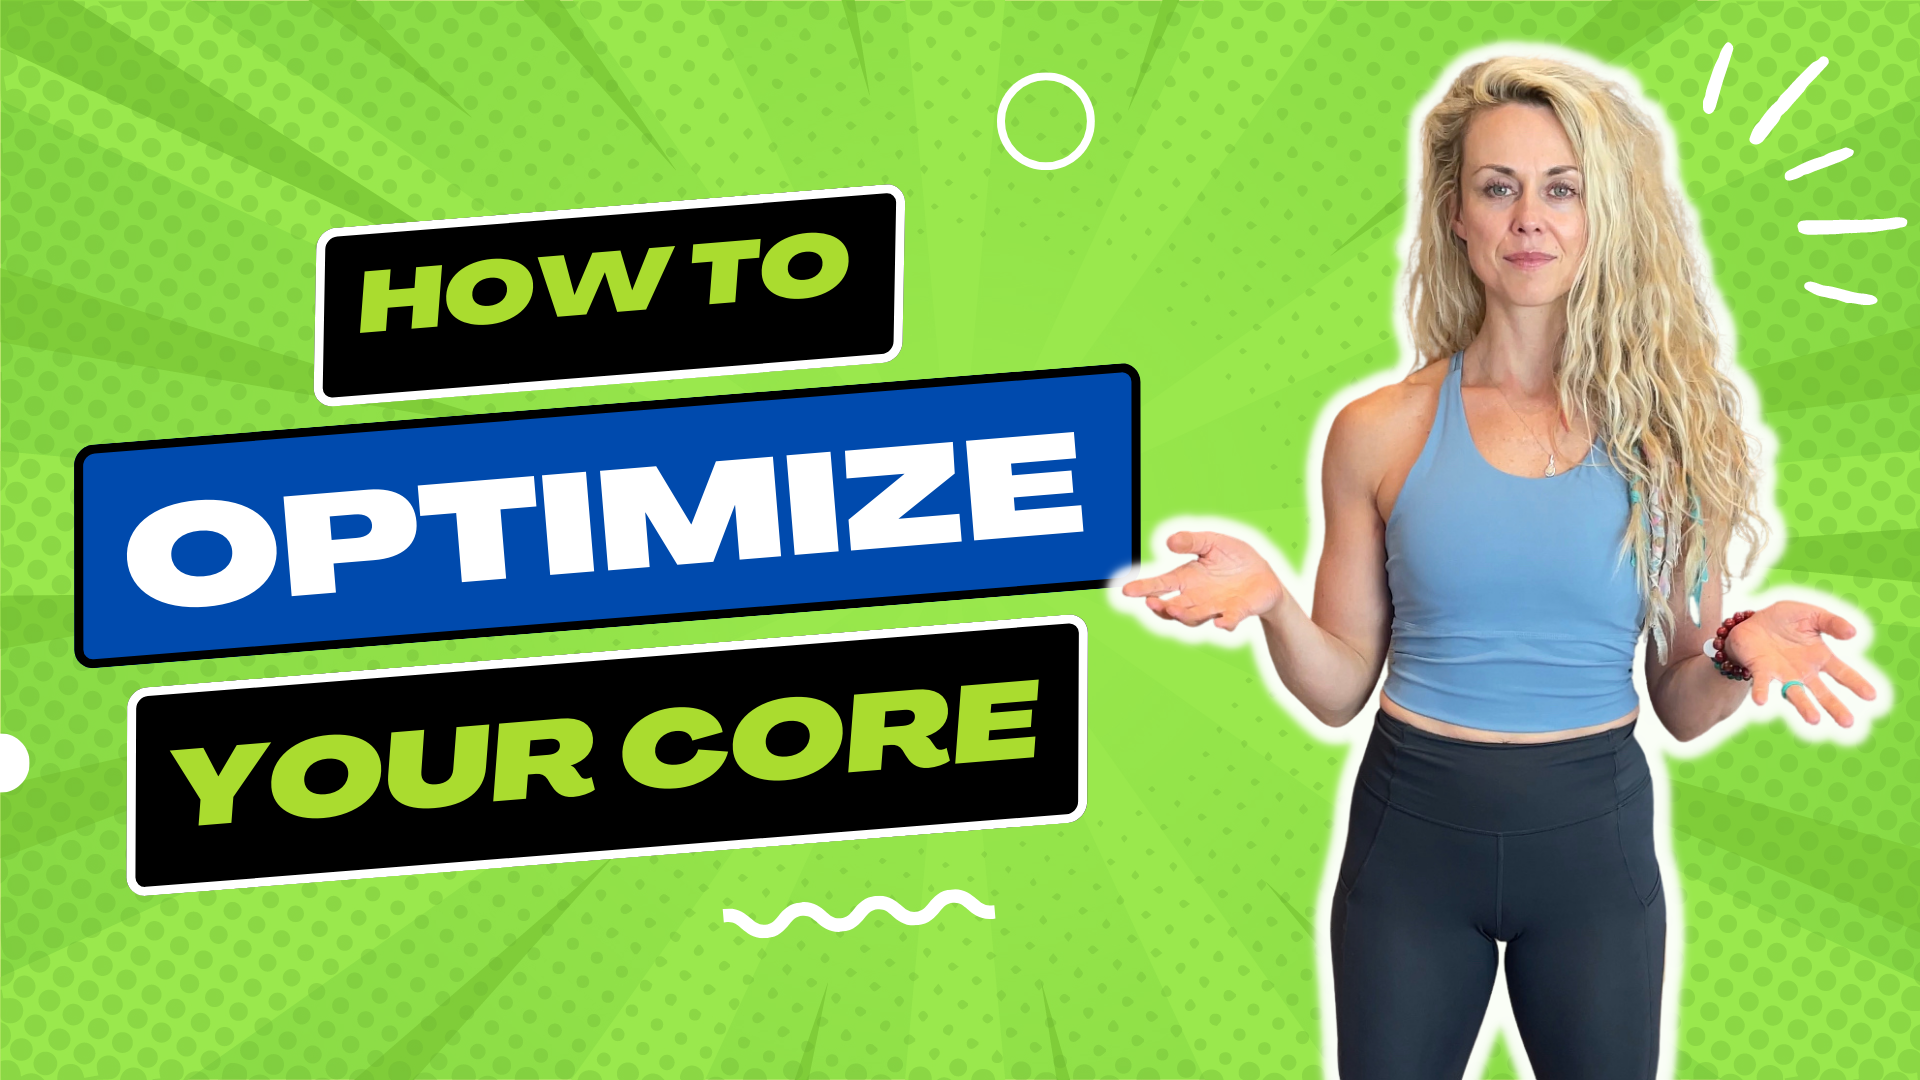 How to optimize your core